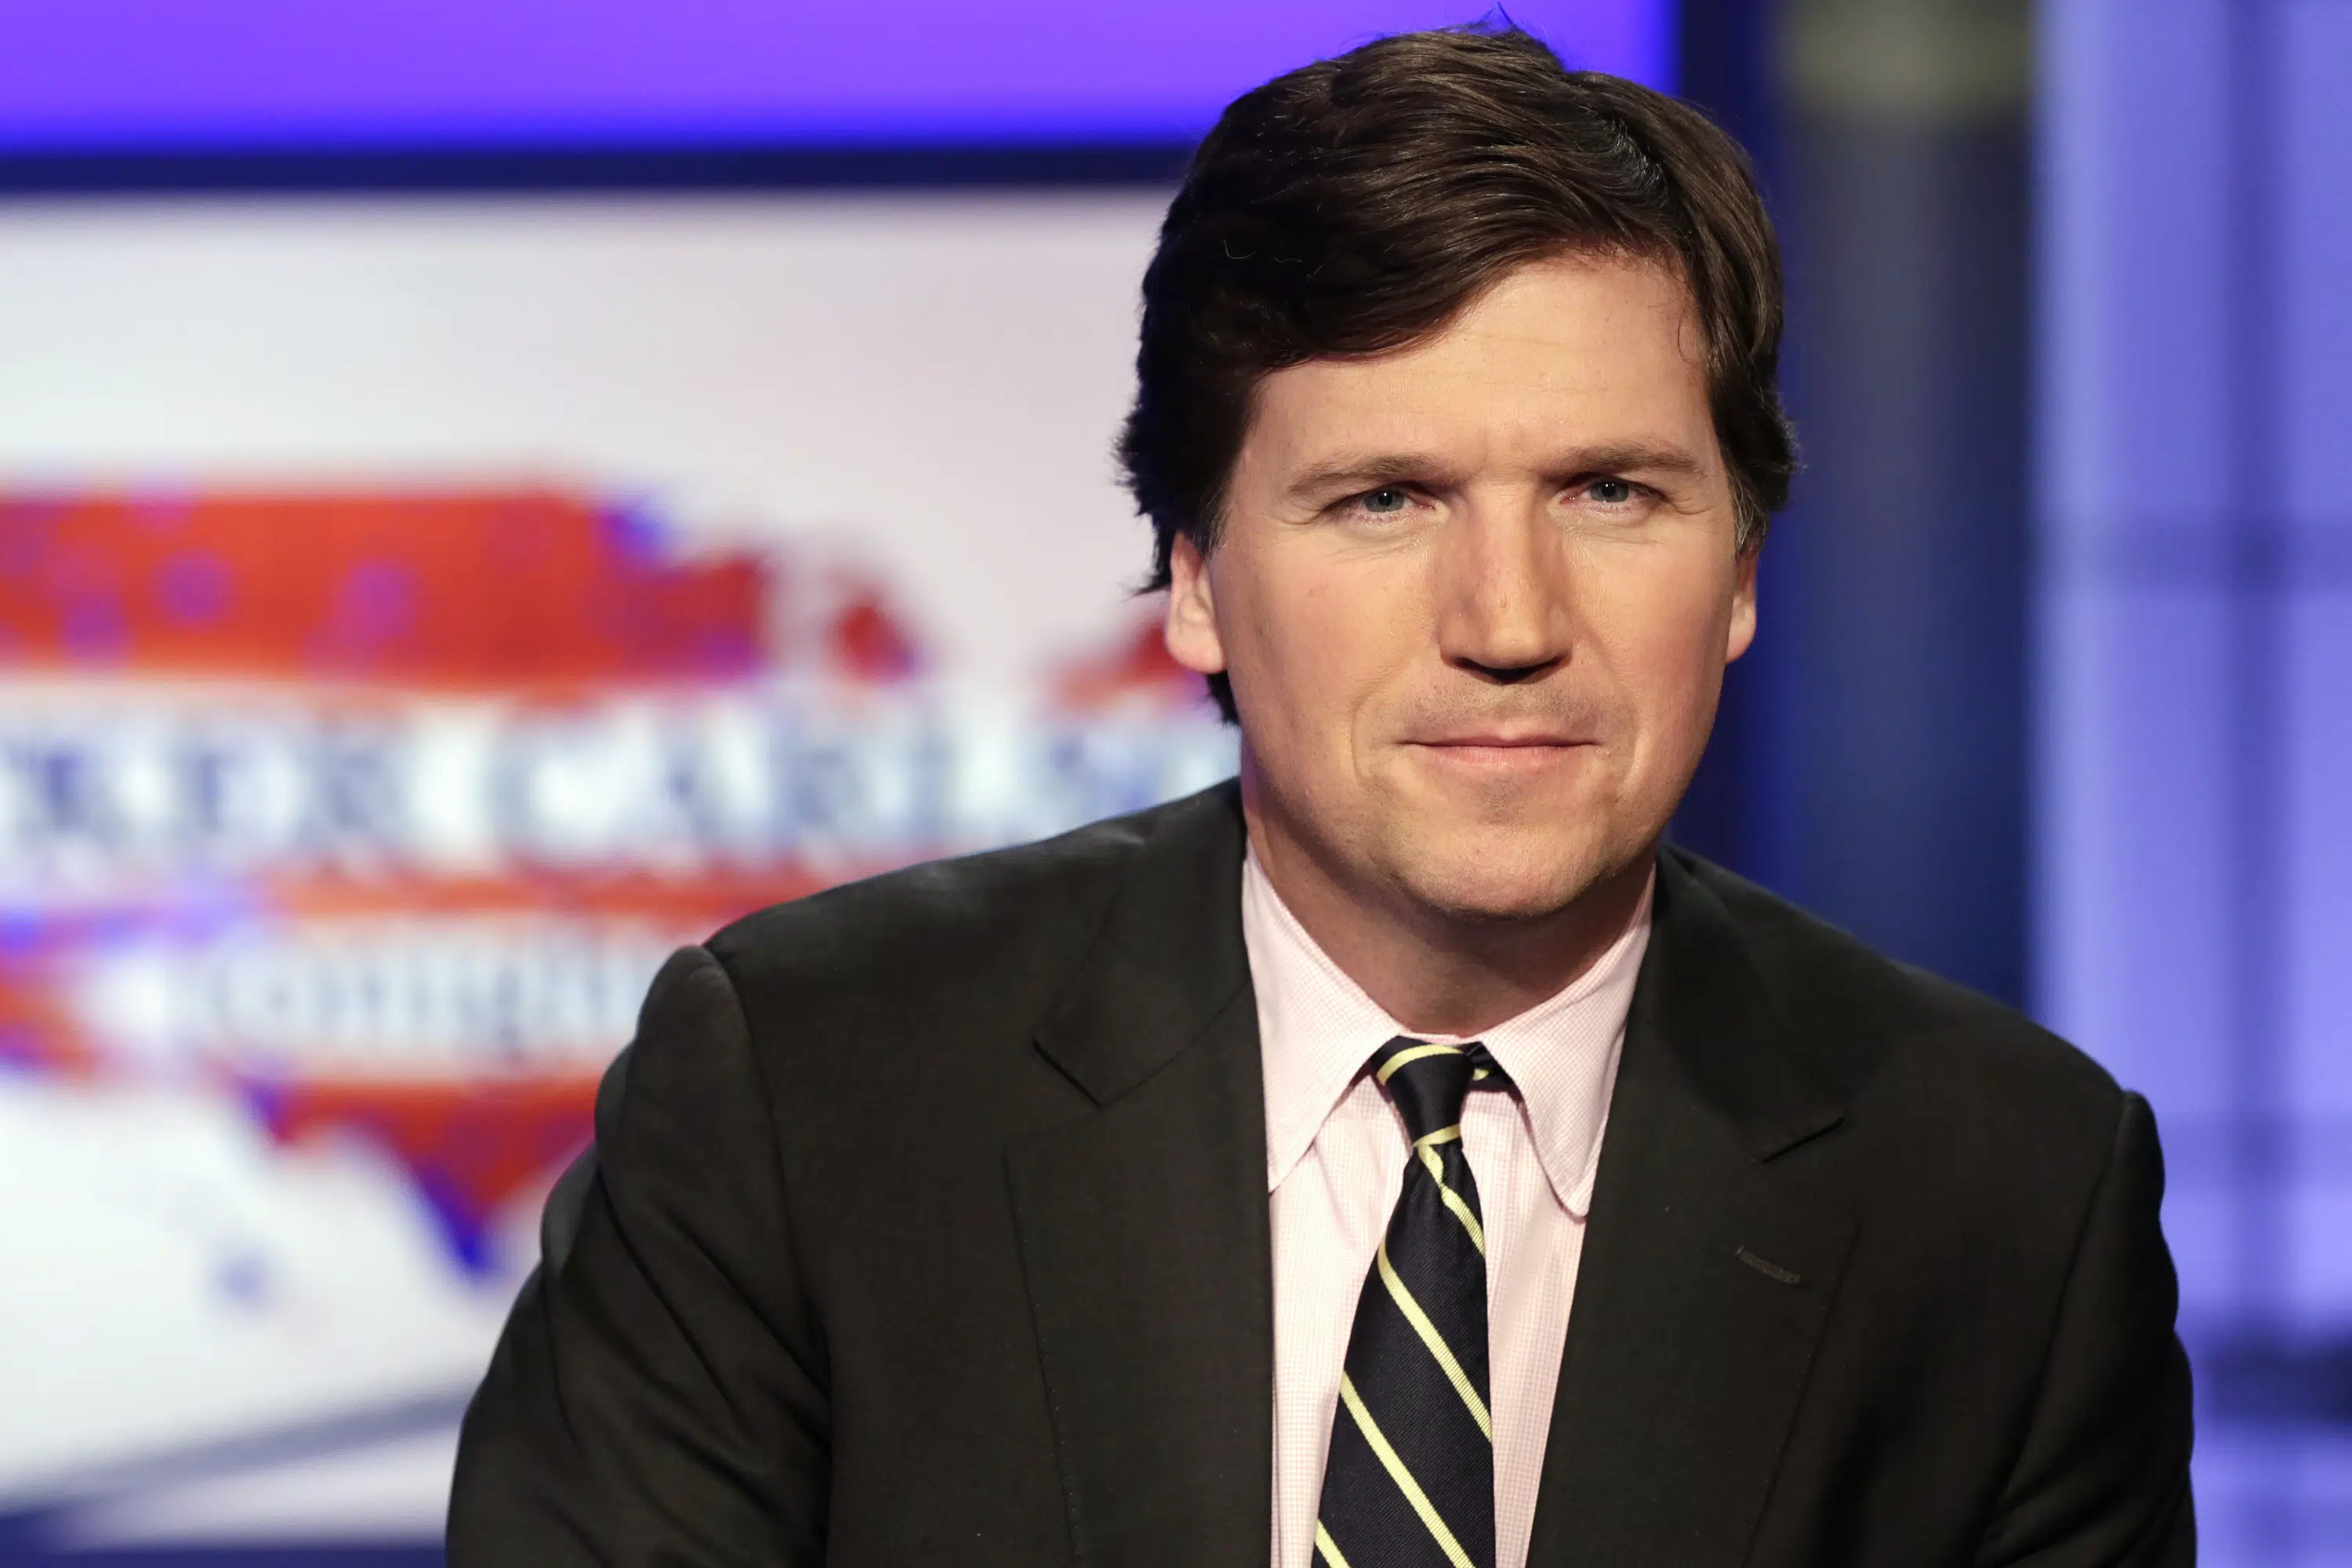 Fox ratings tumble in Tucker Carlson slot after his firing